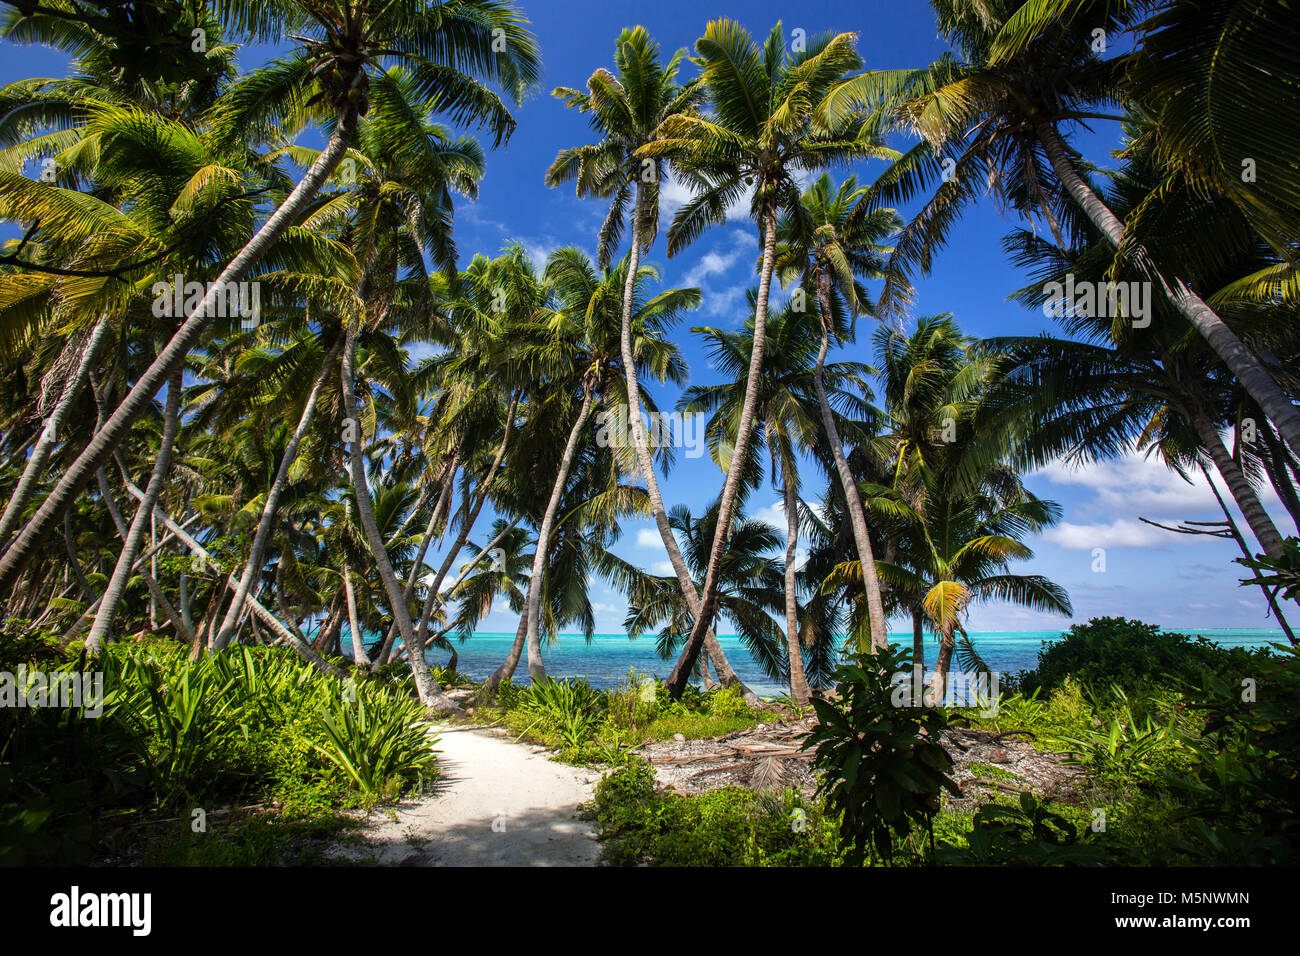 Half Moon Caye National Monument, Turneffe Atoll, Belize Banque D'Images